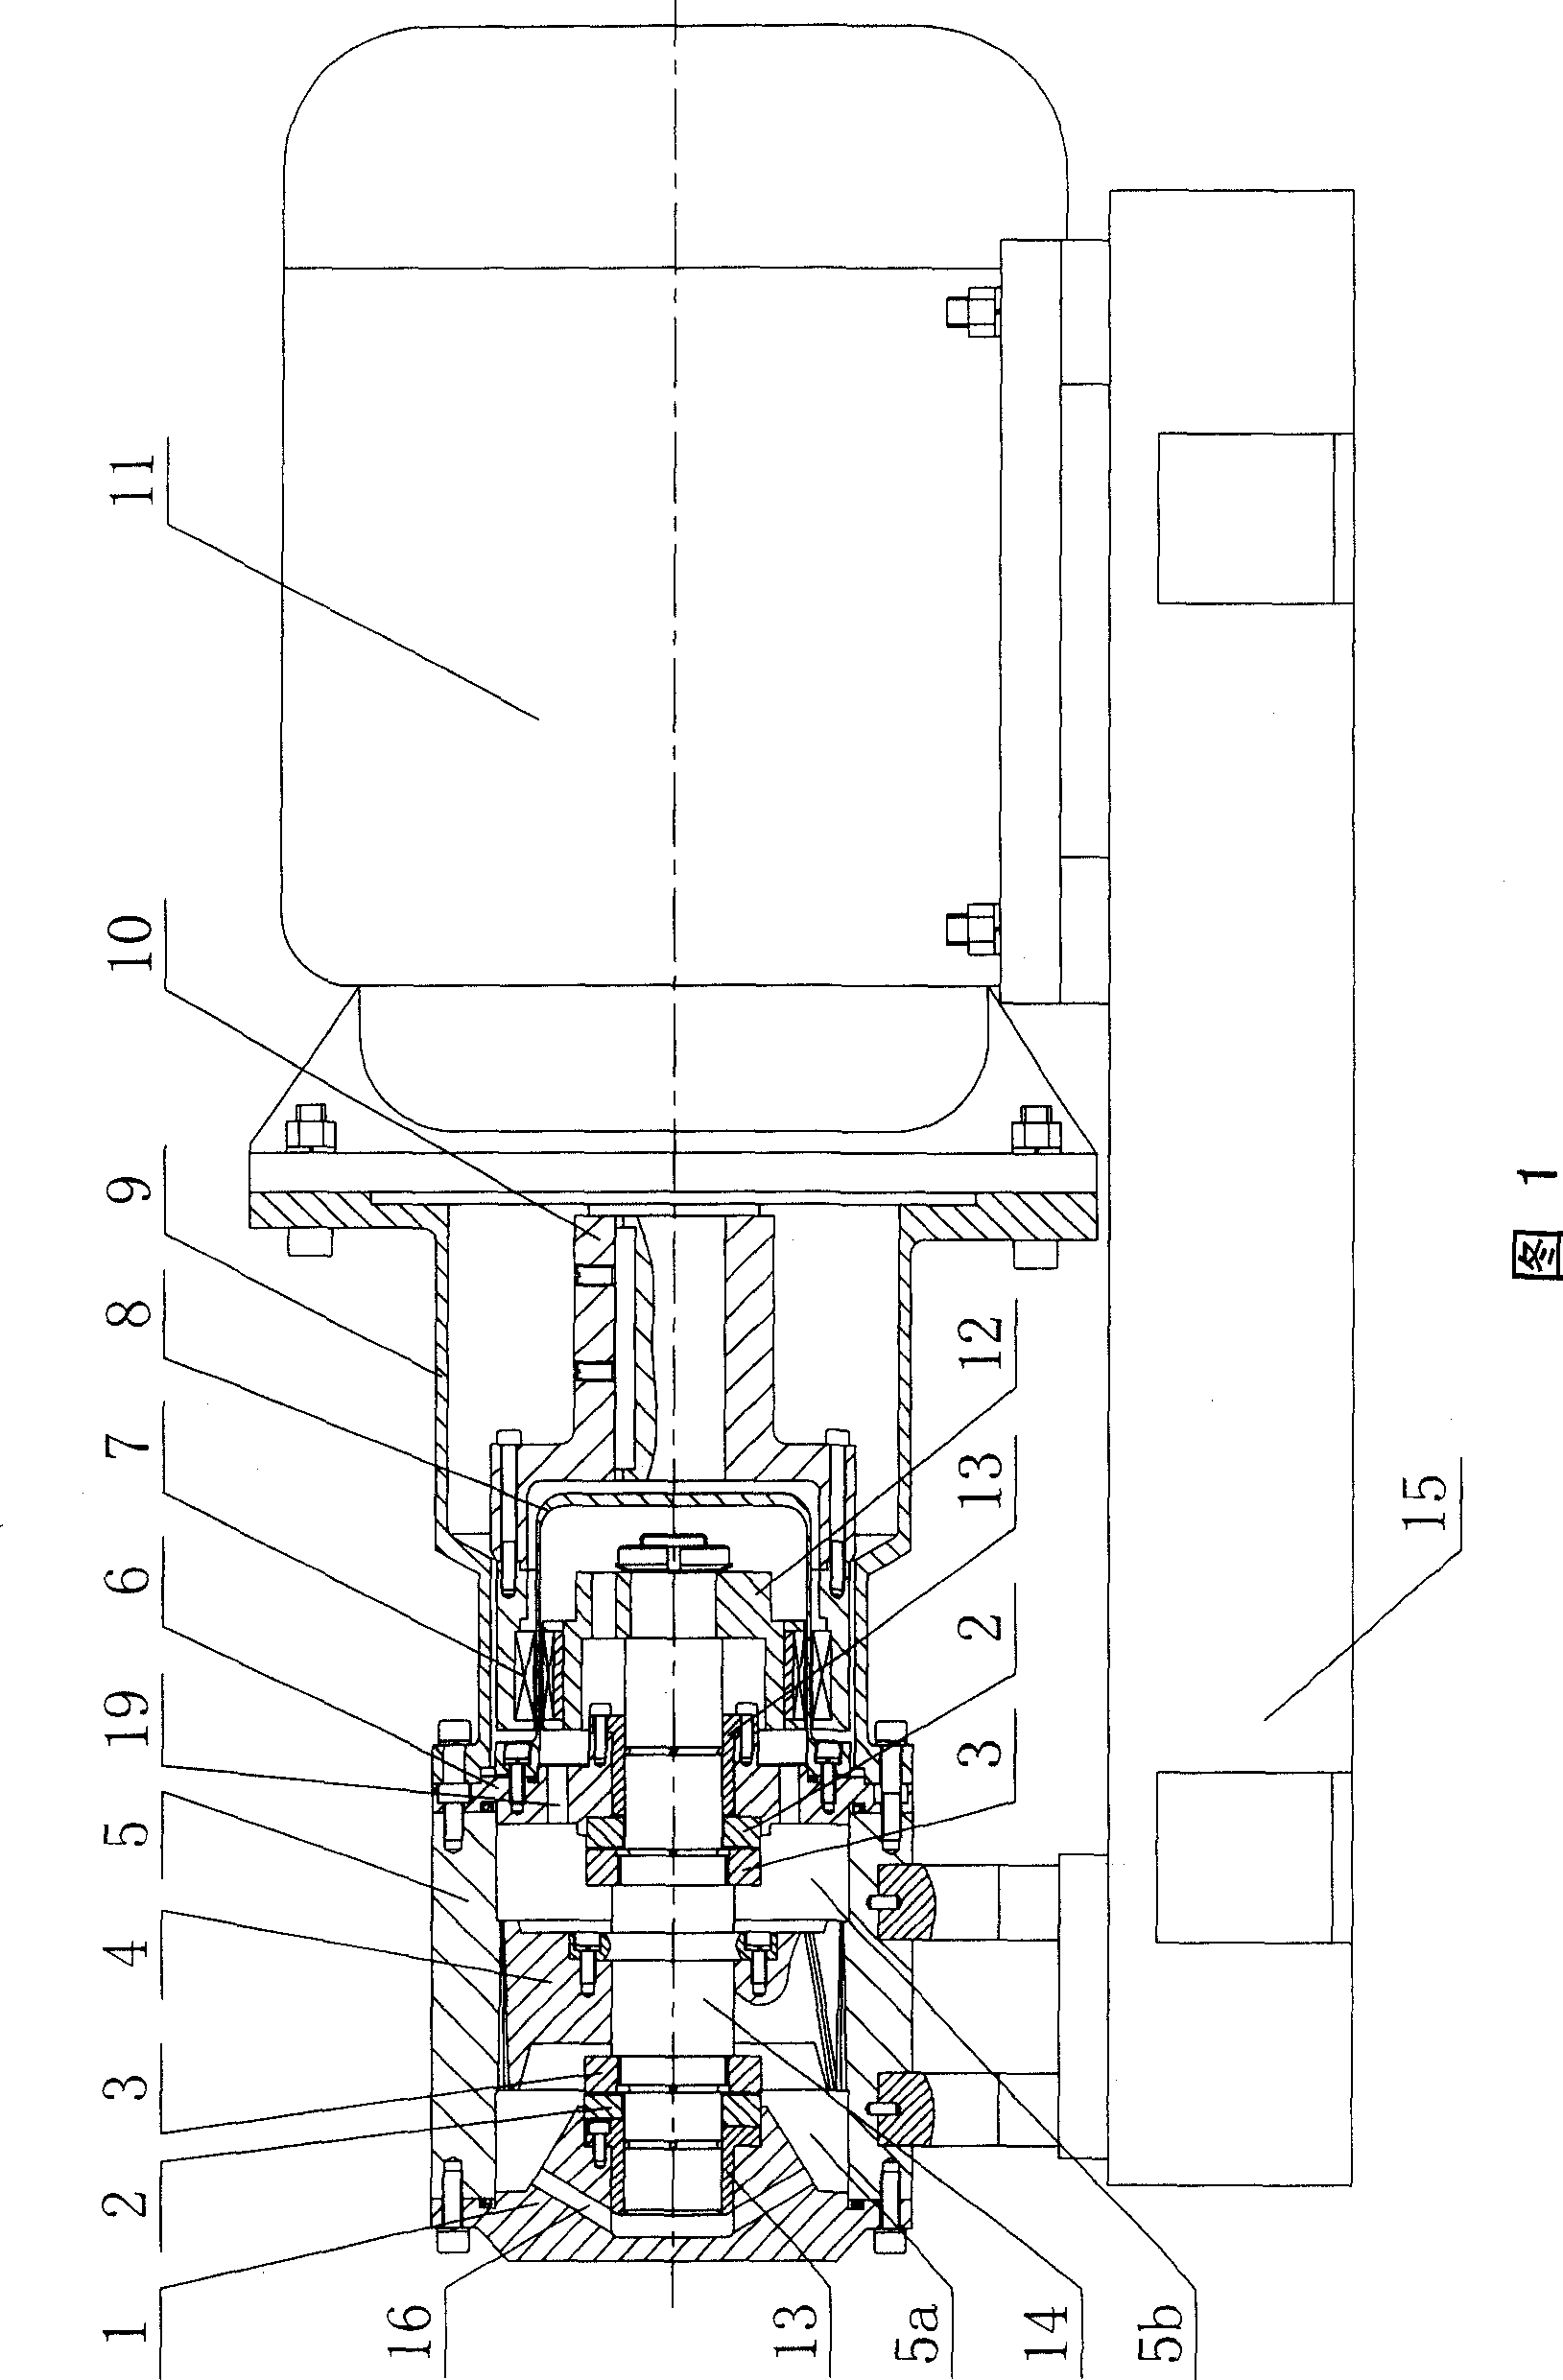 Apparatus for micrifying fuel